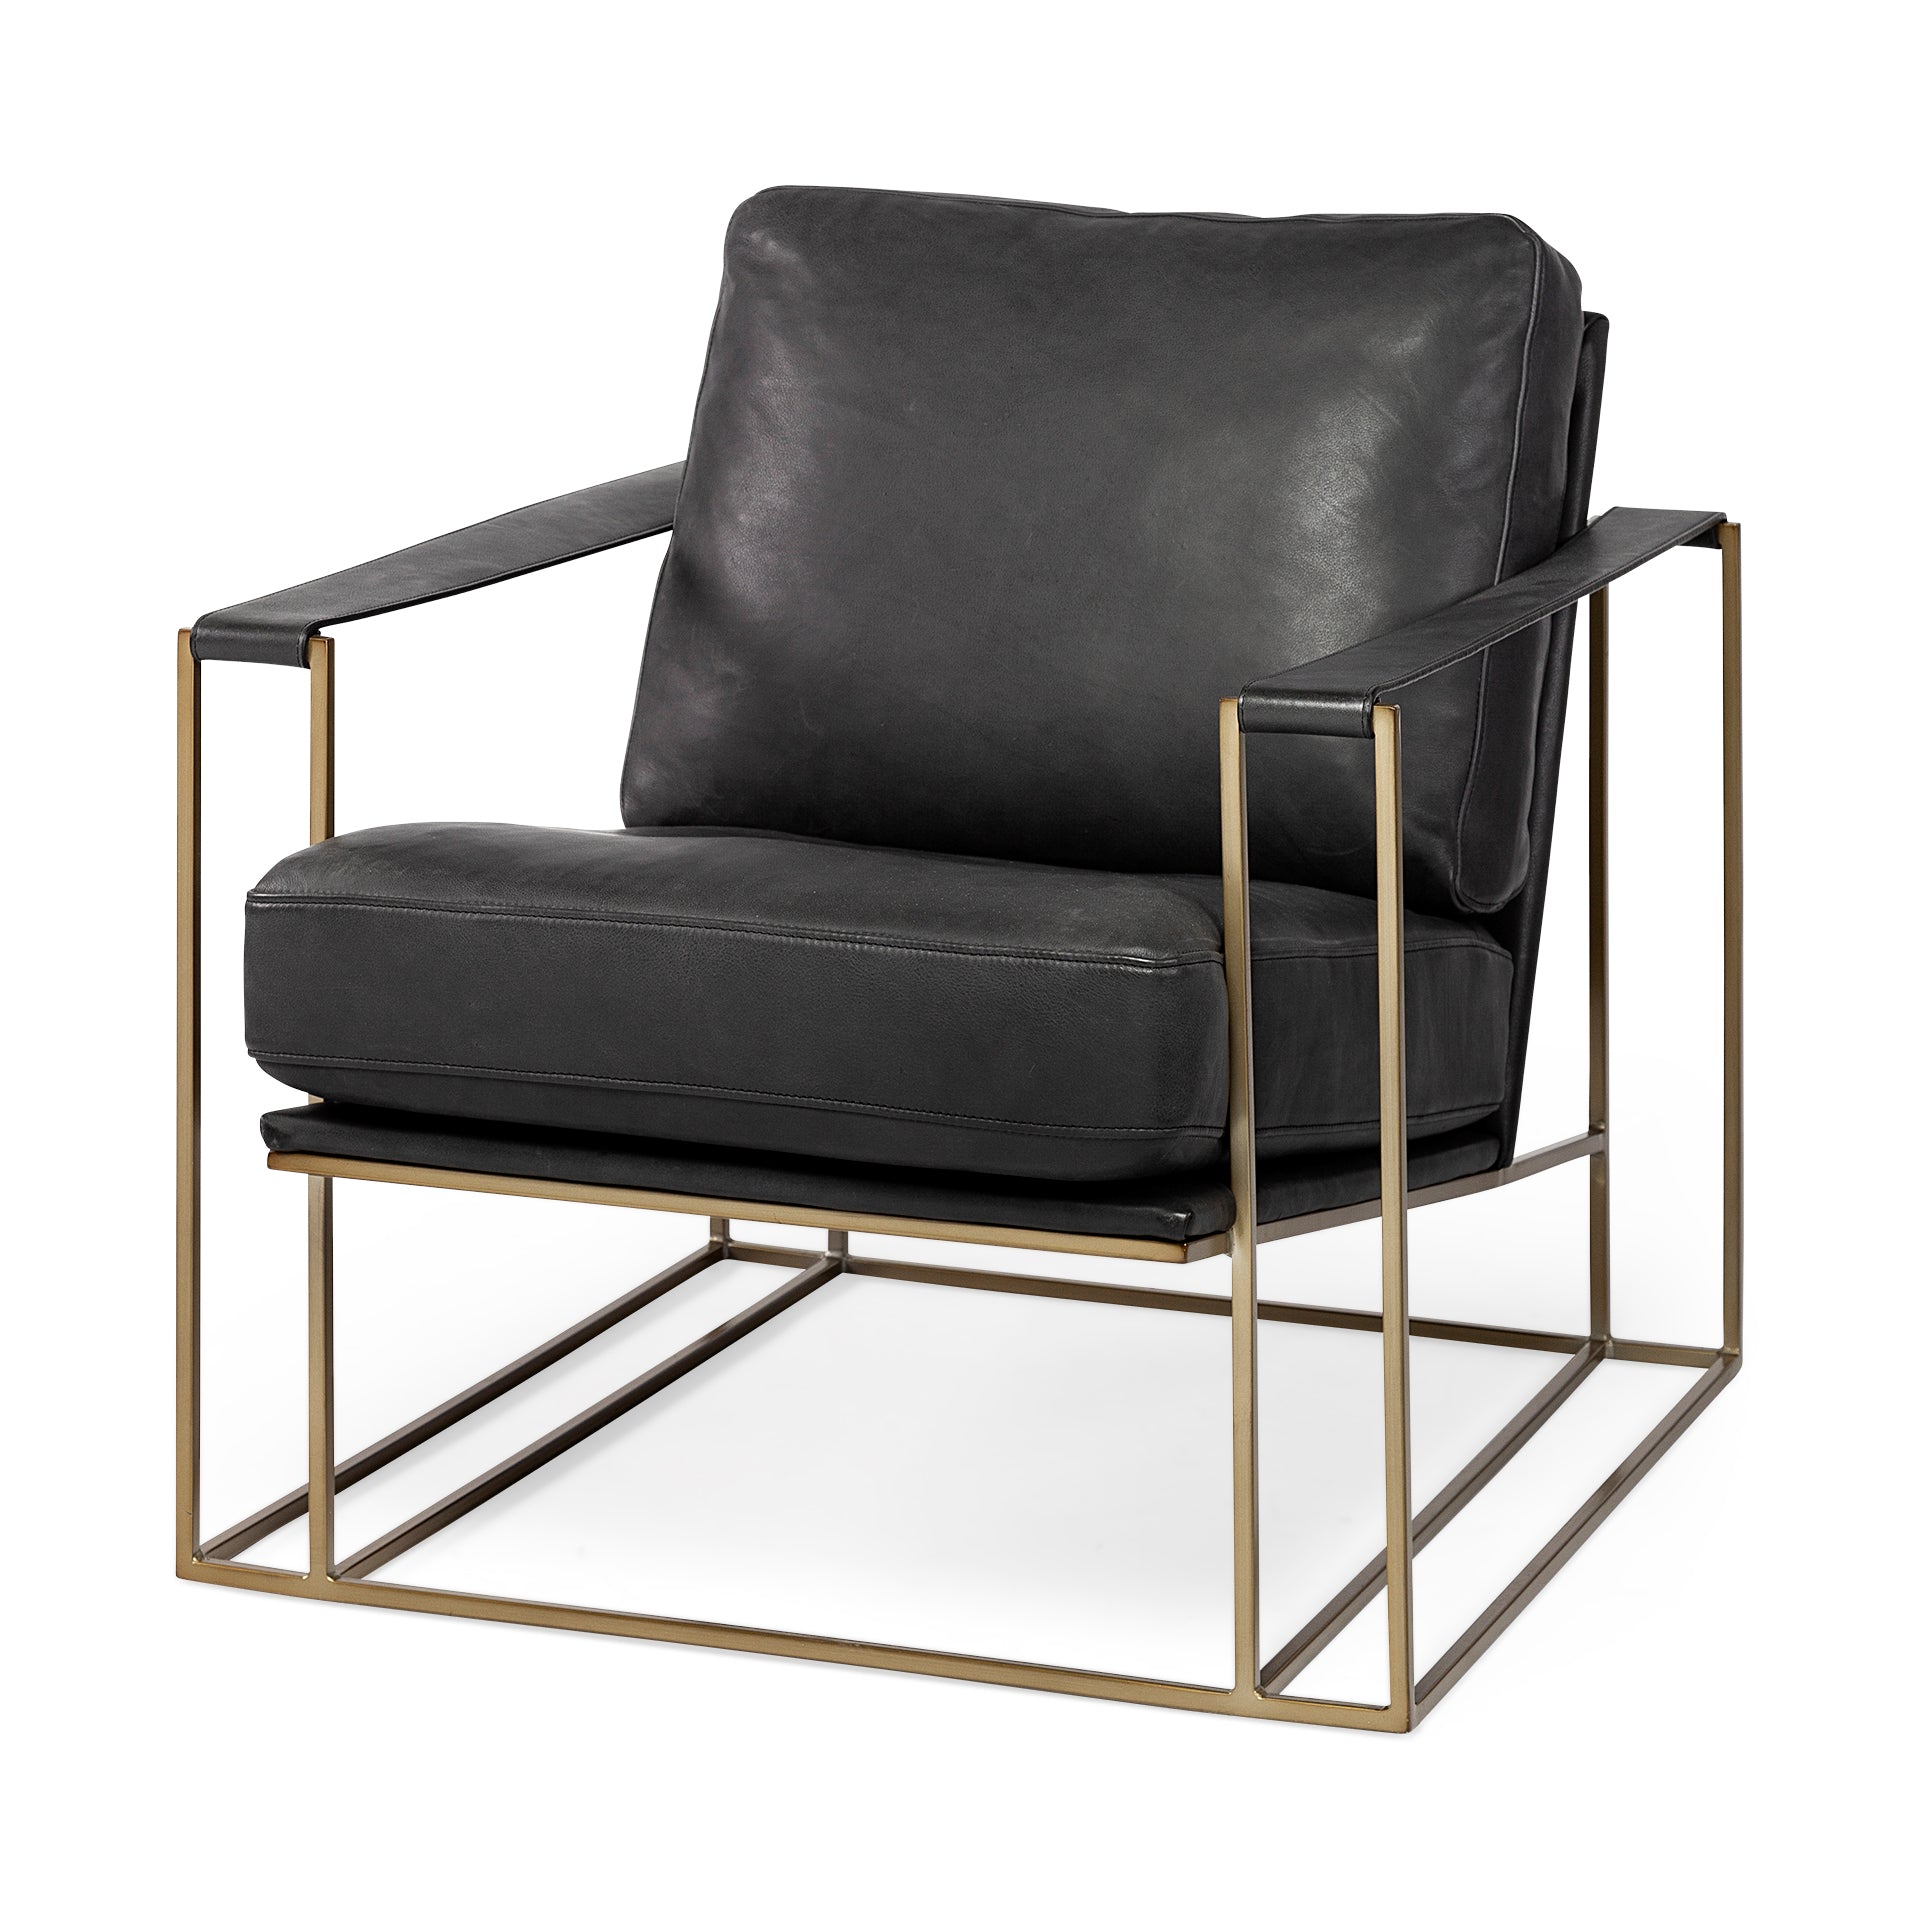 Light House Co., Watson Black Leather Wrap Gold Metal Frame Accent Chair